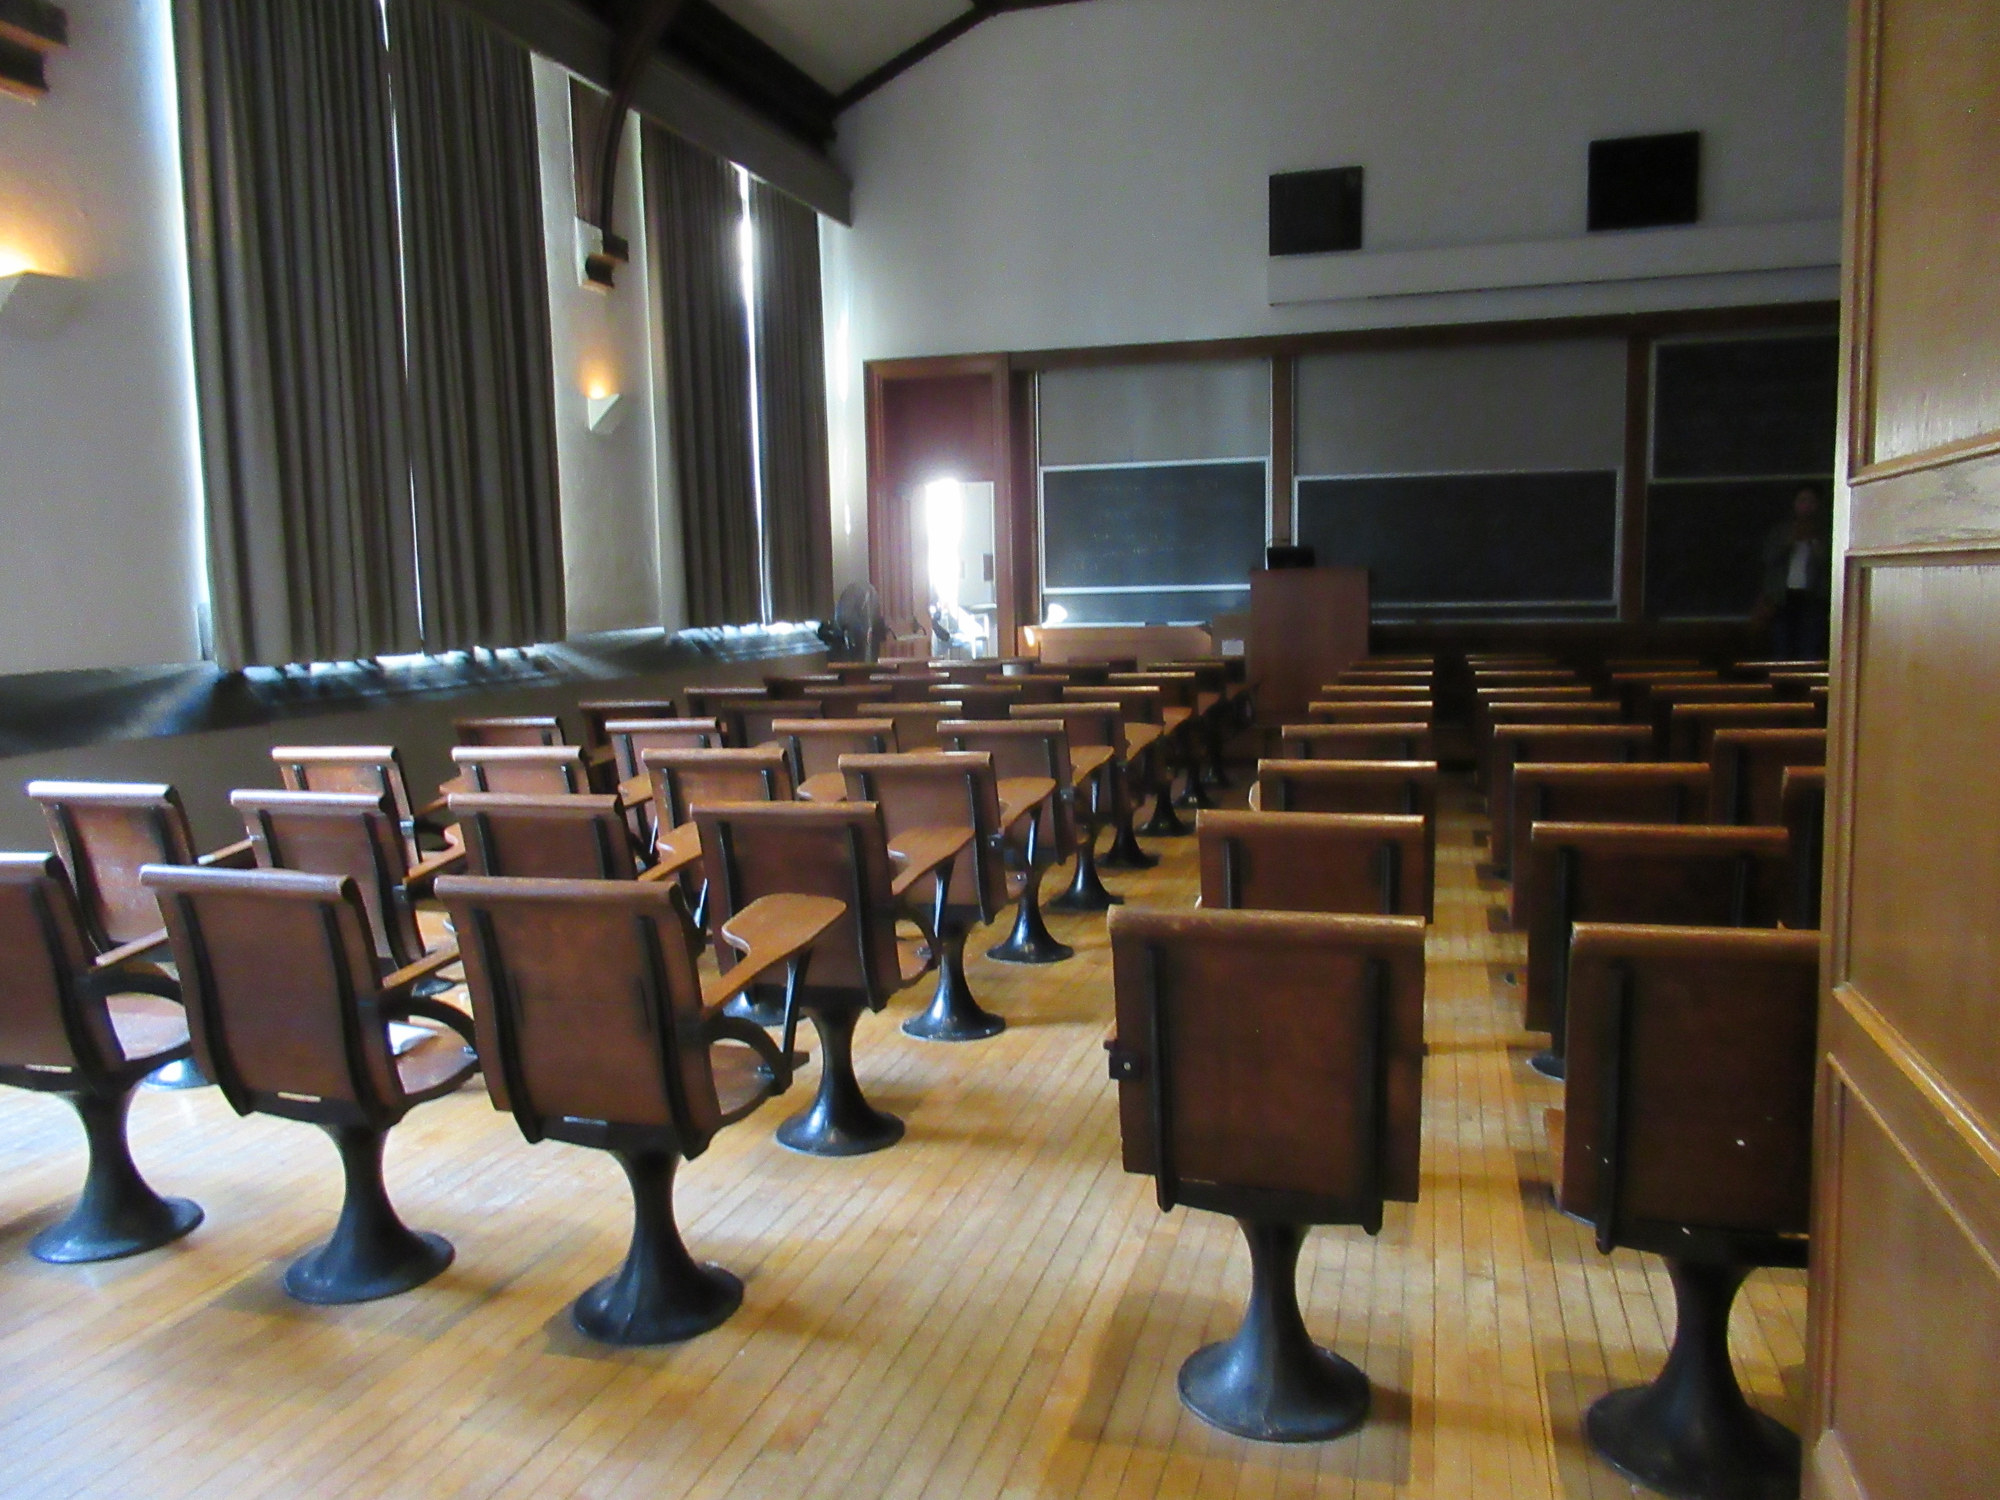 A Princeton lecture hall